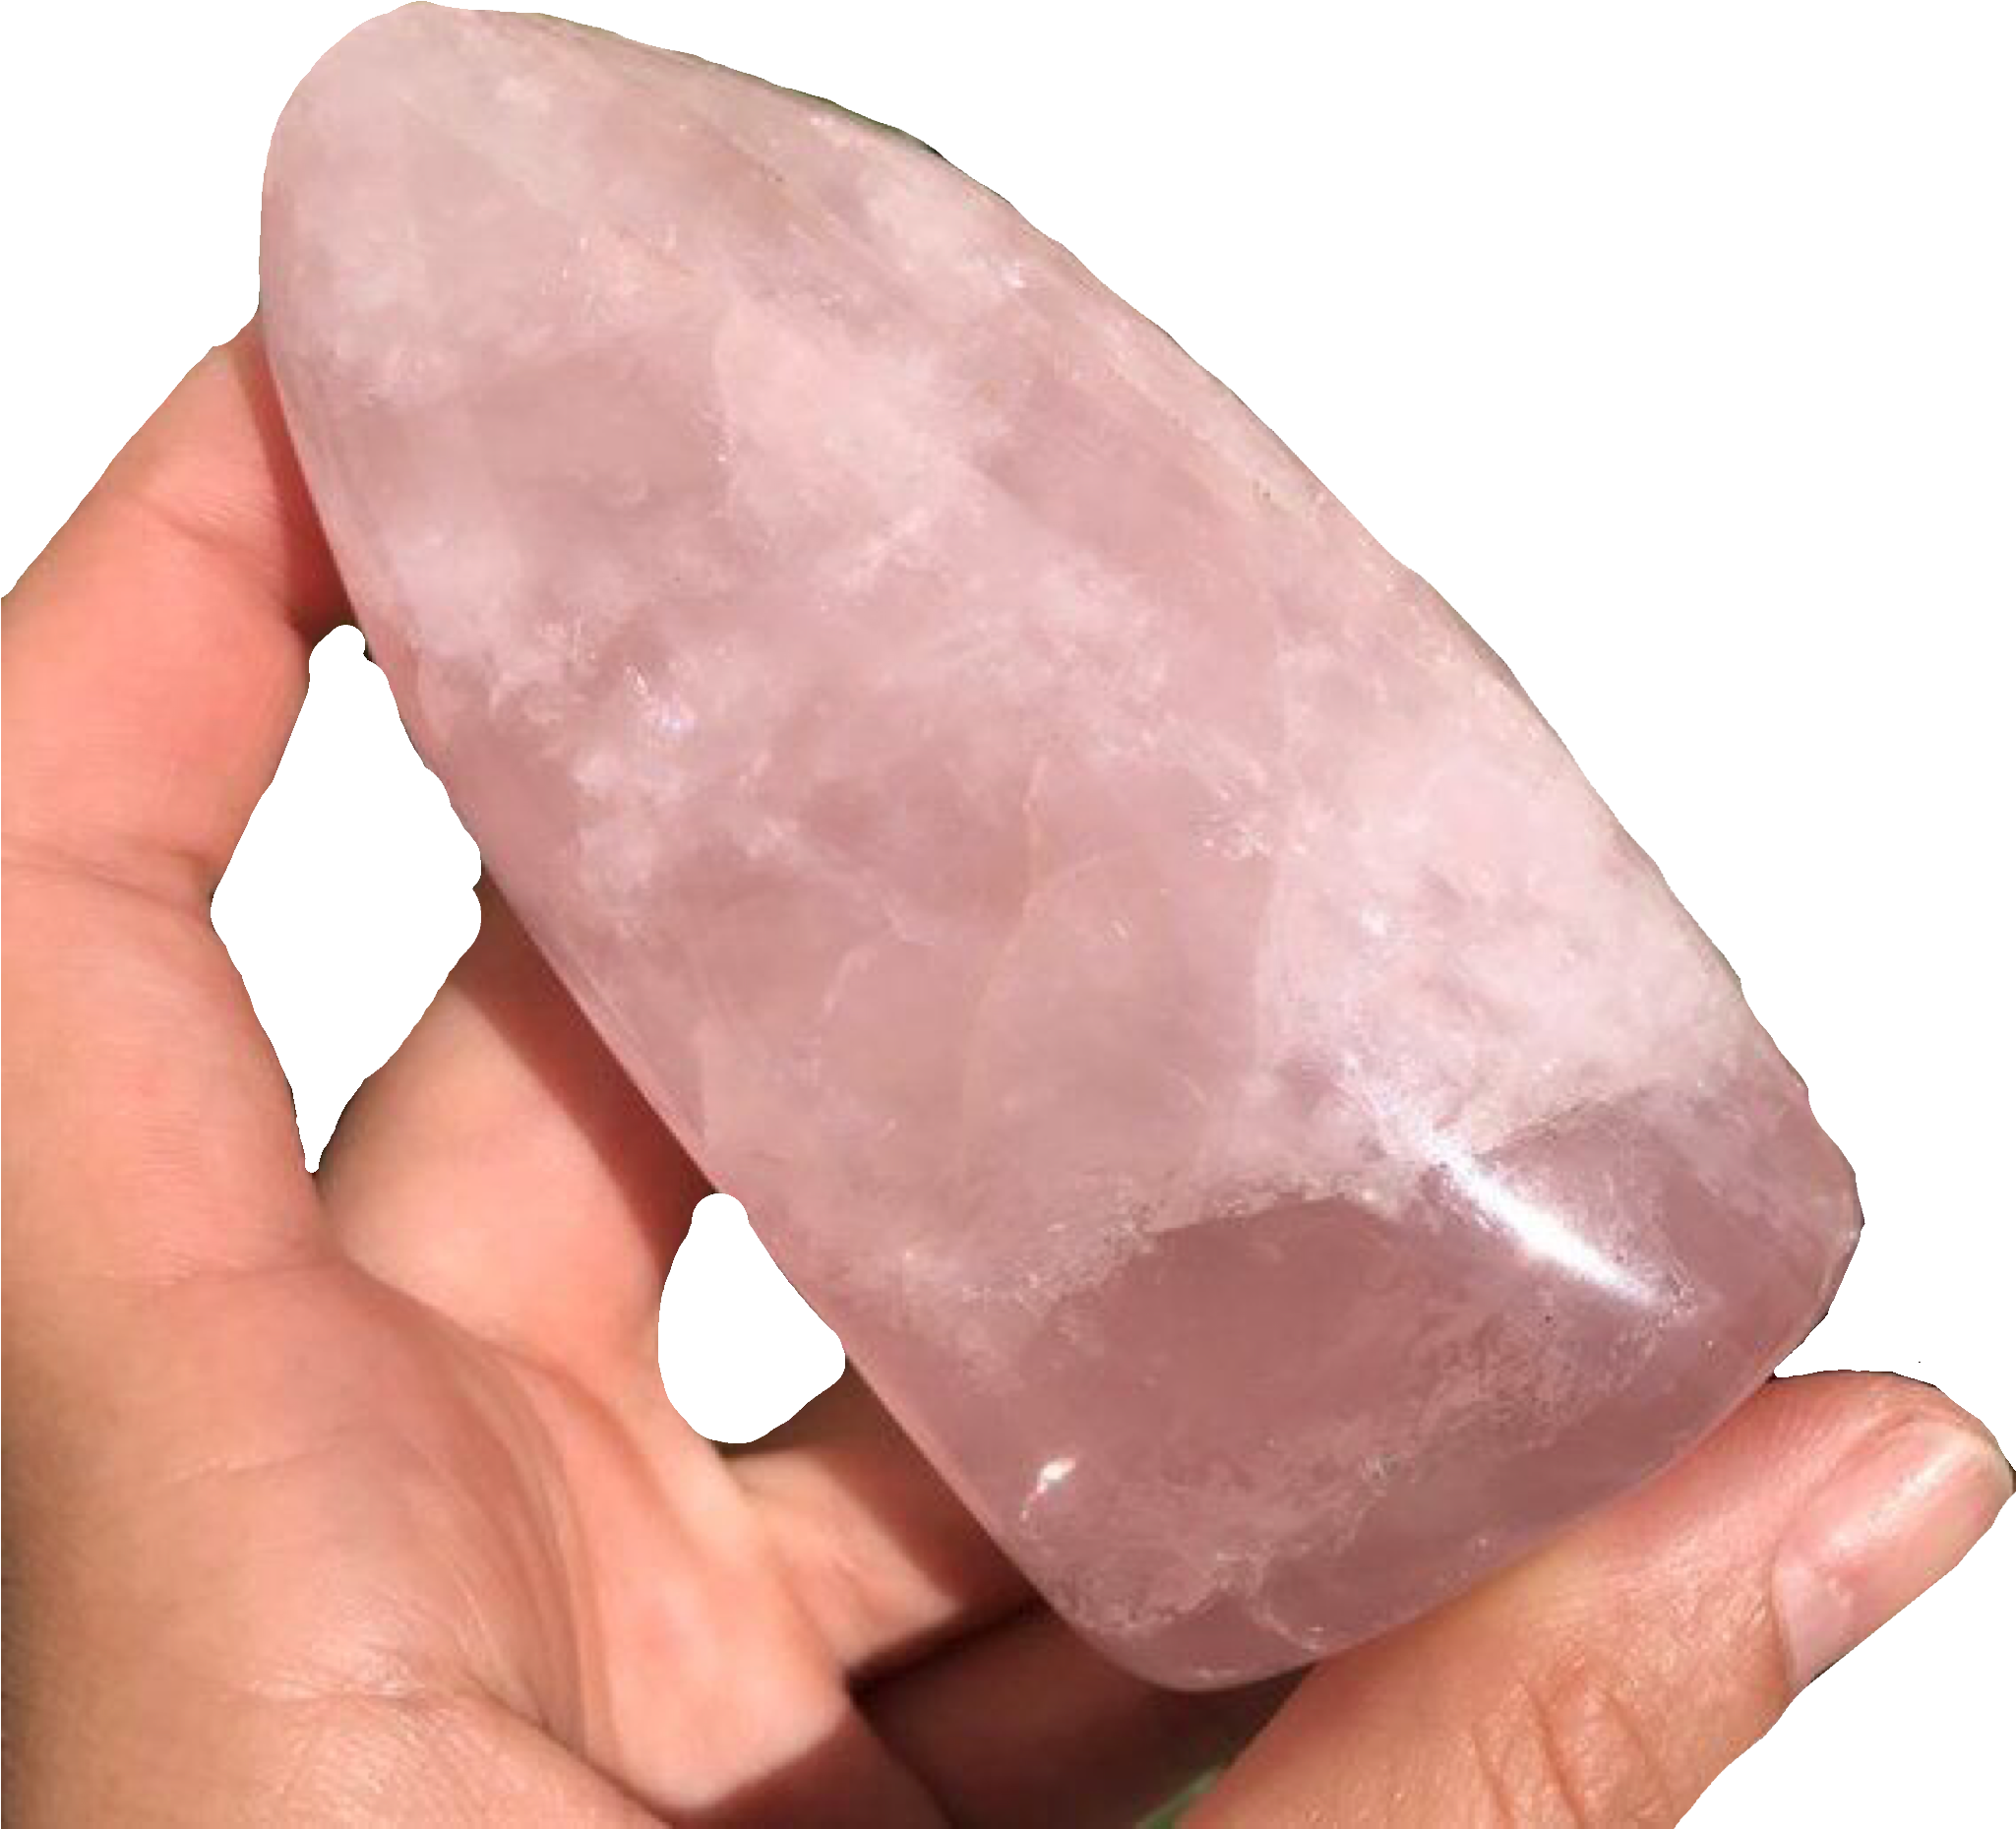 A Hand Holding A Pink Rock